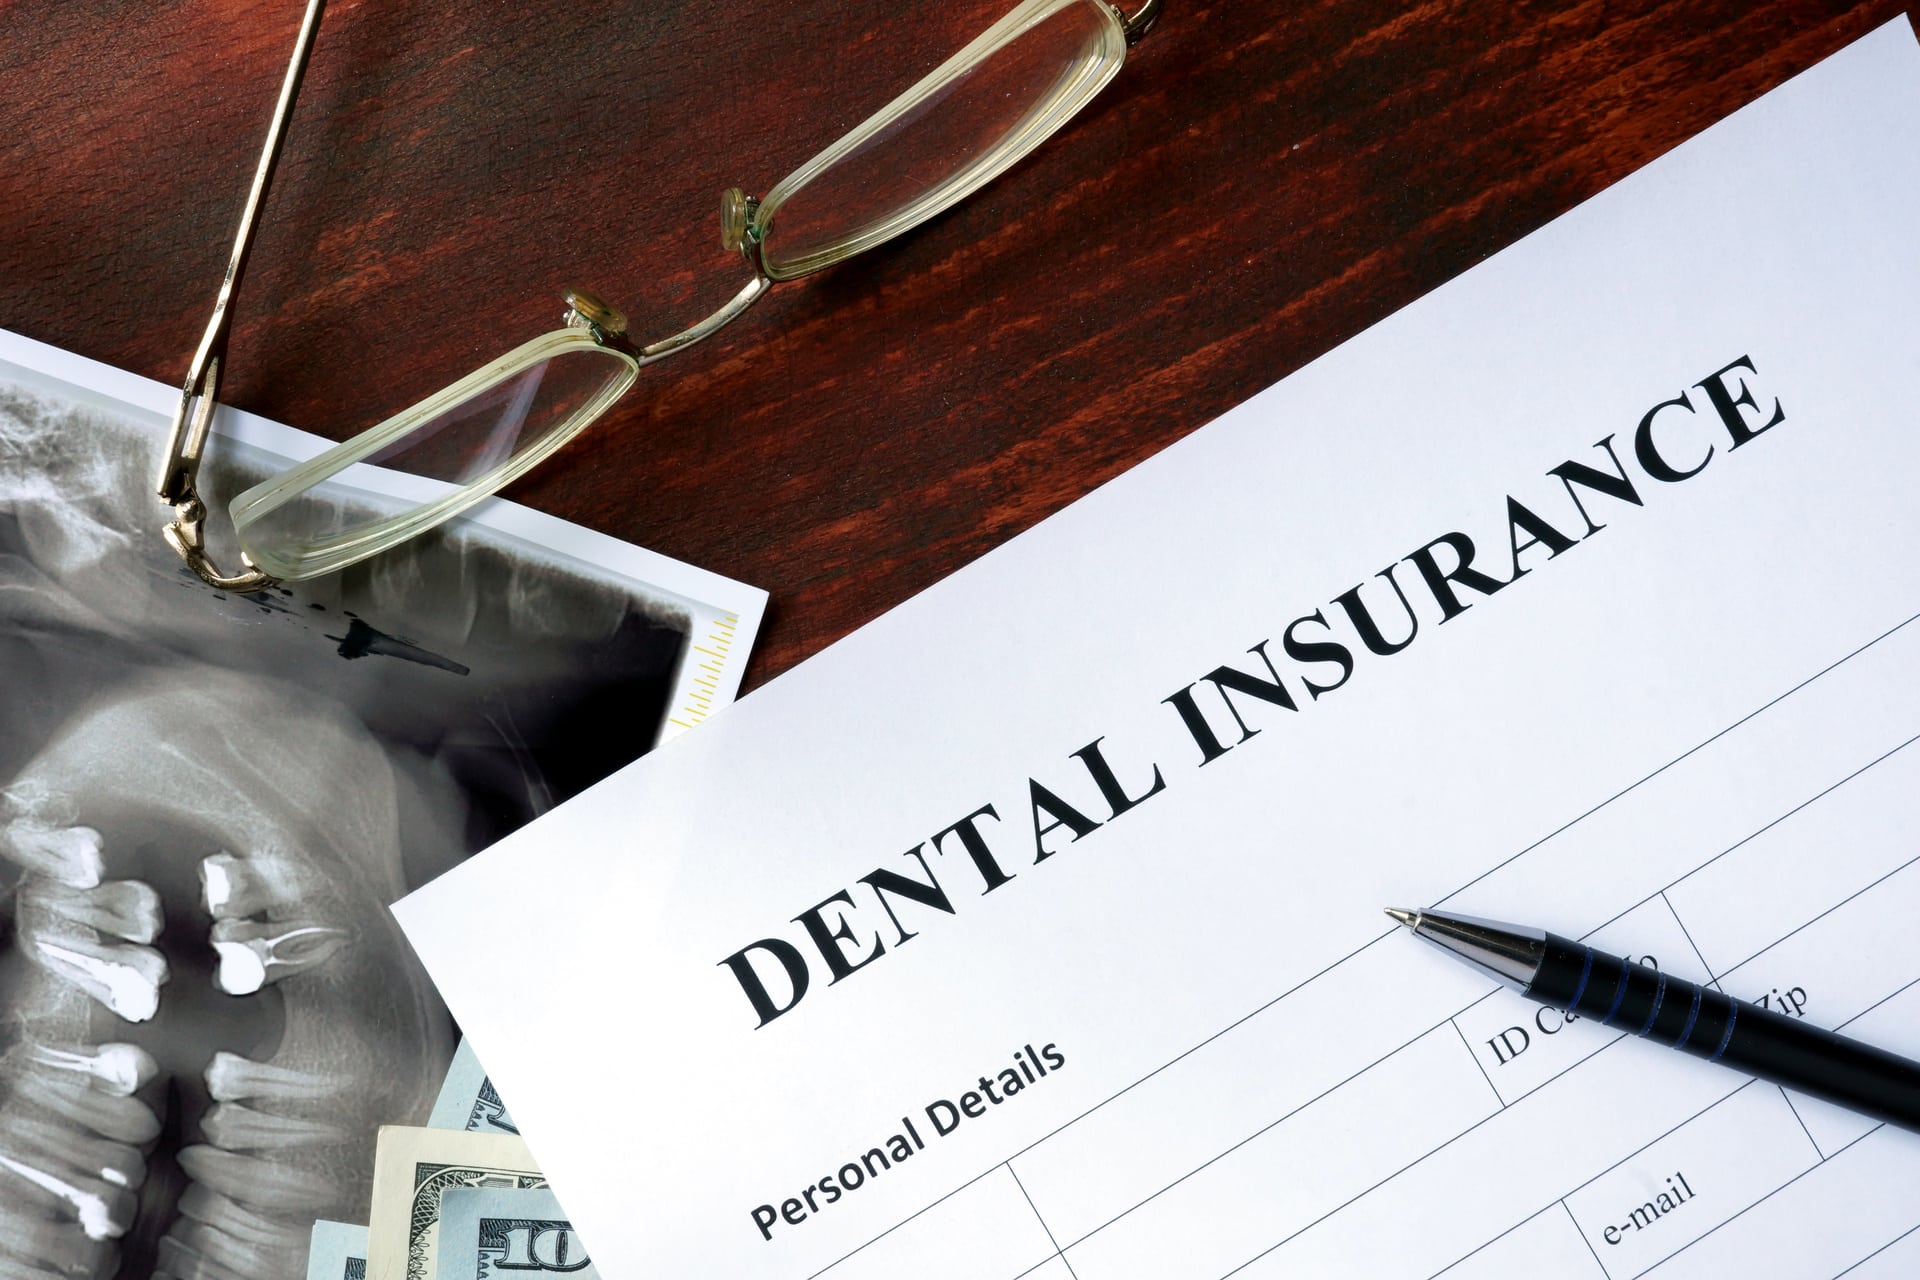 Dental insurance form on the wooden table.